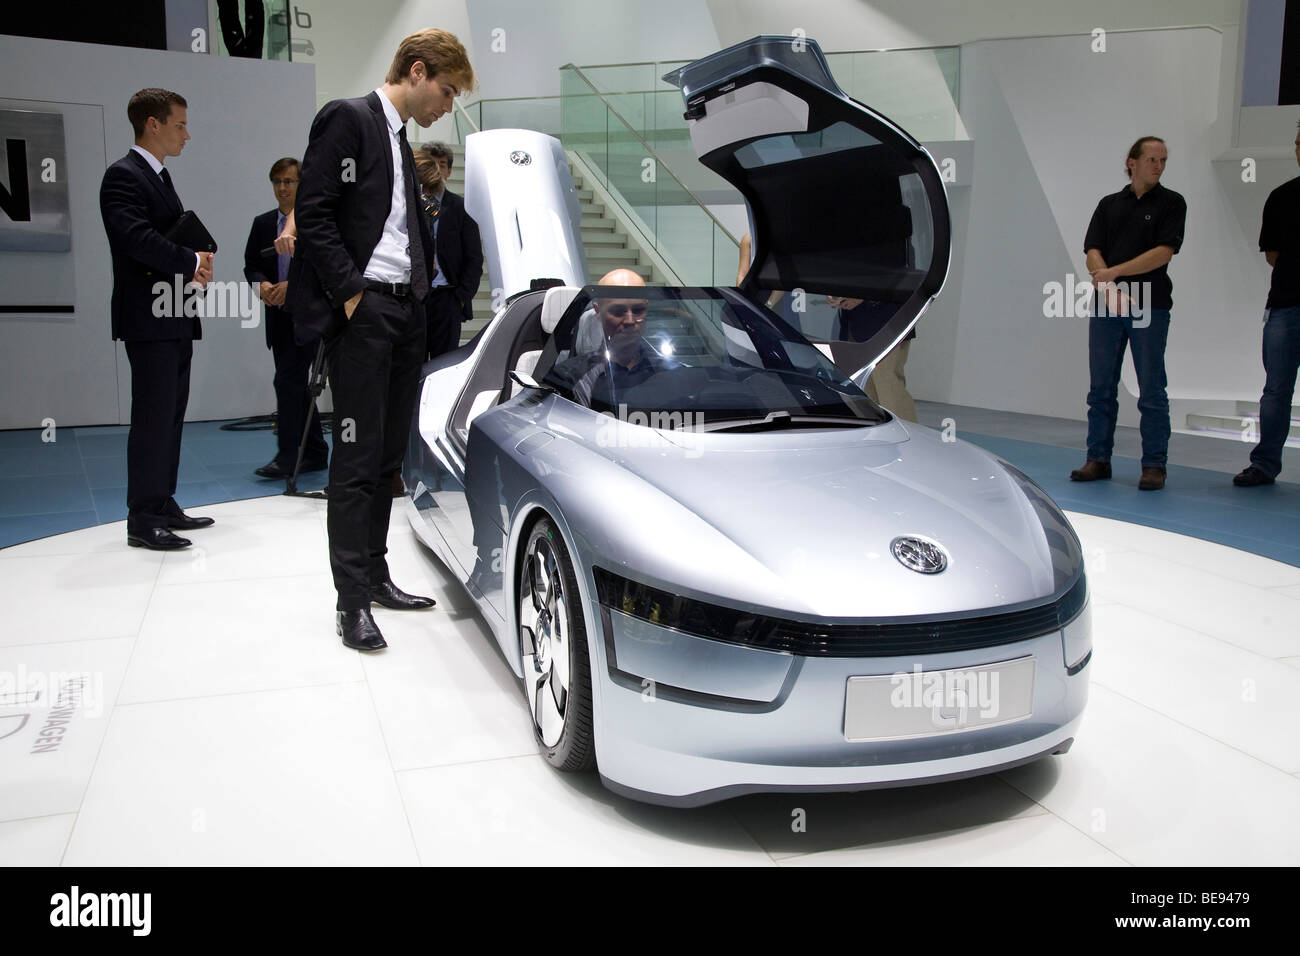 Volkswagen 170 mpg diesel hybrid two-seater L1. At a European motor show. Stock Photo